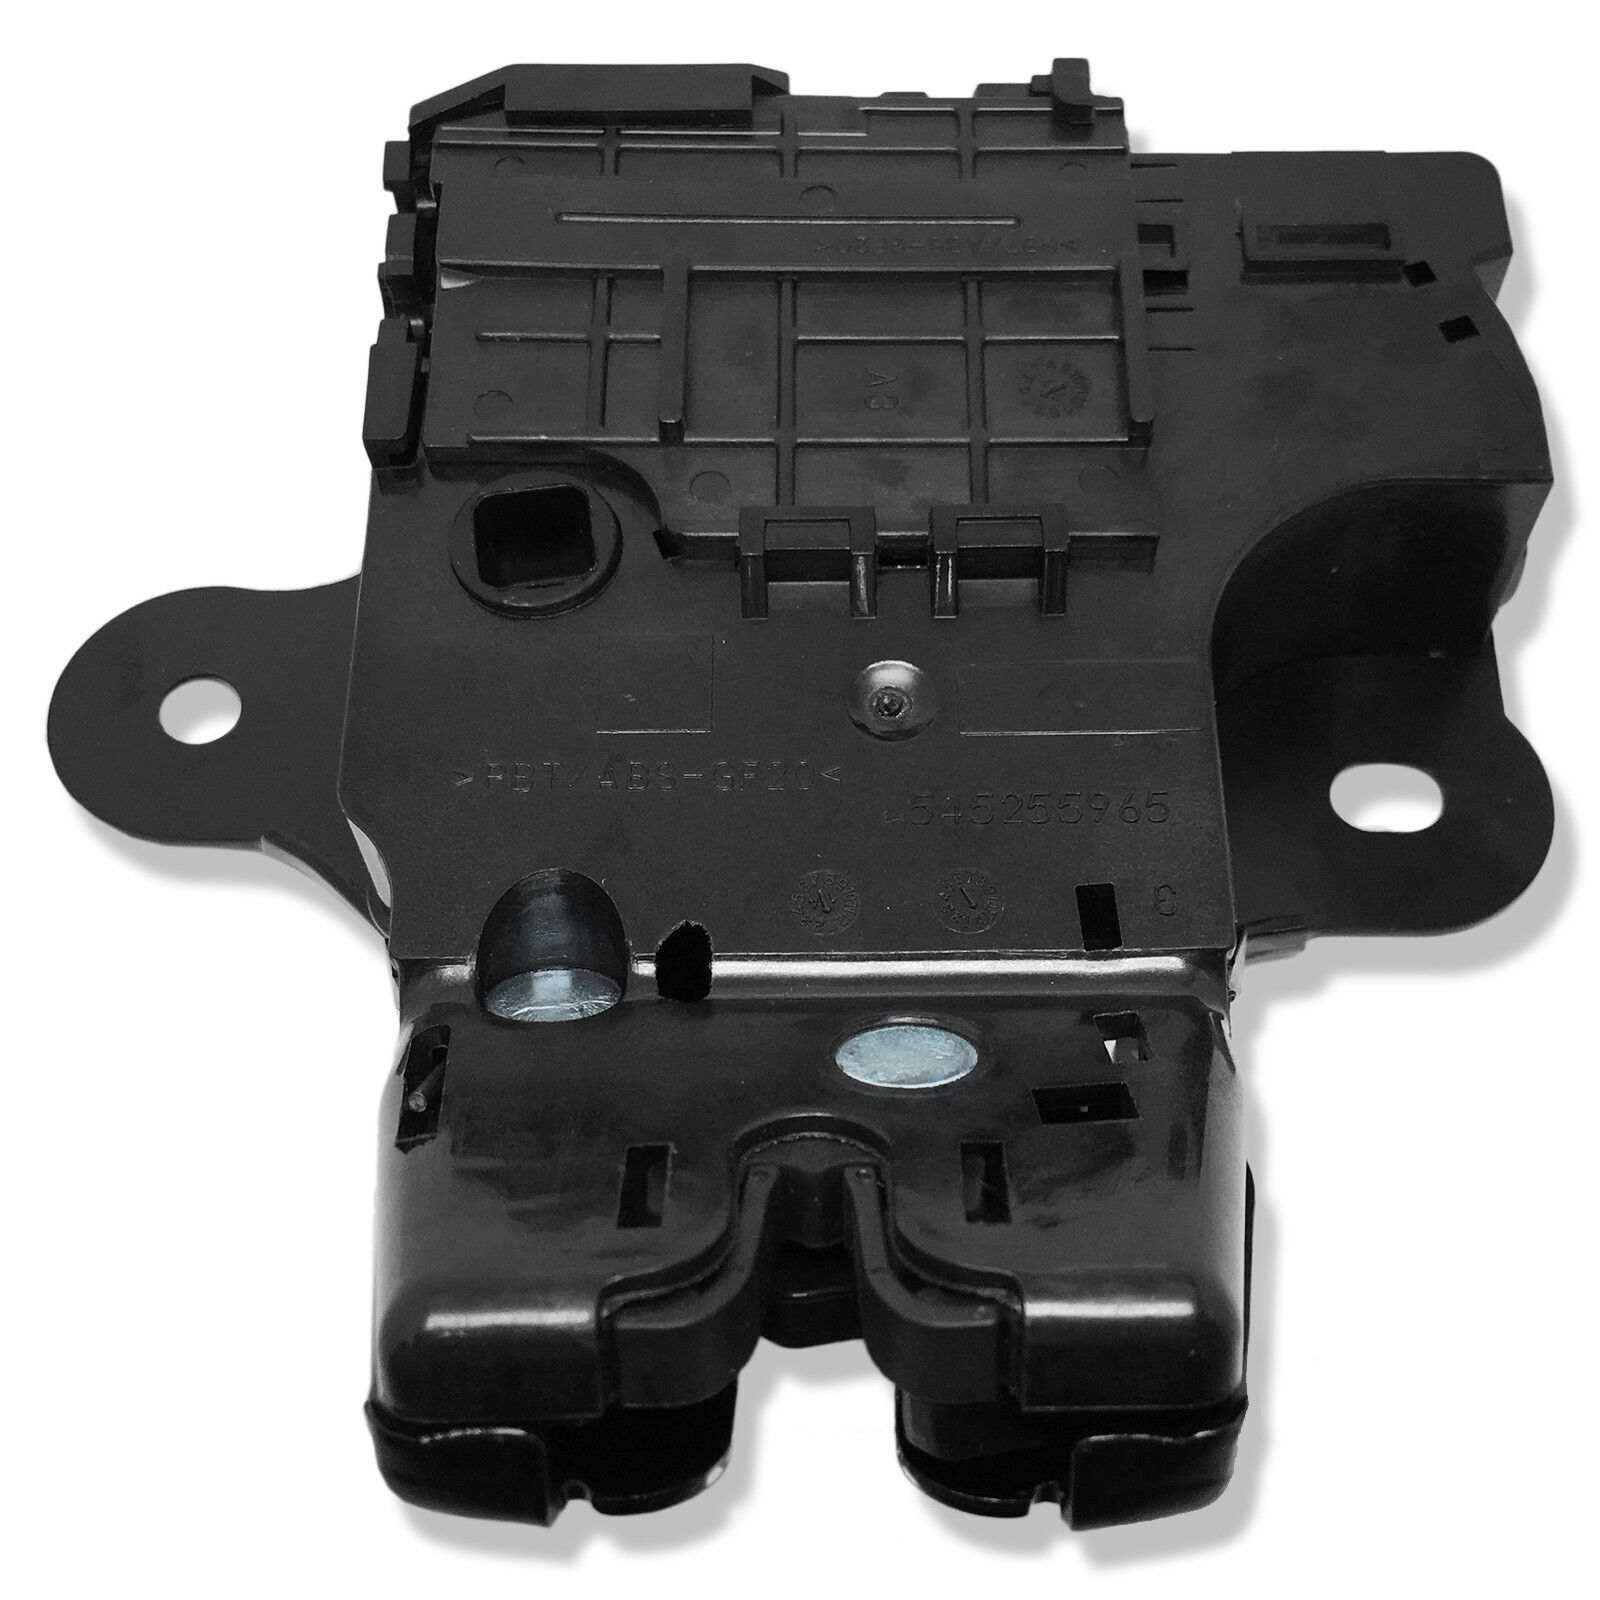 Trunk Latch Assy For GM NEW 13501988 (2010-2019) Cadillac, Buick, Chevy Models)